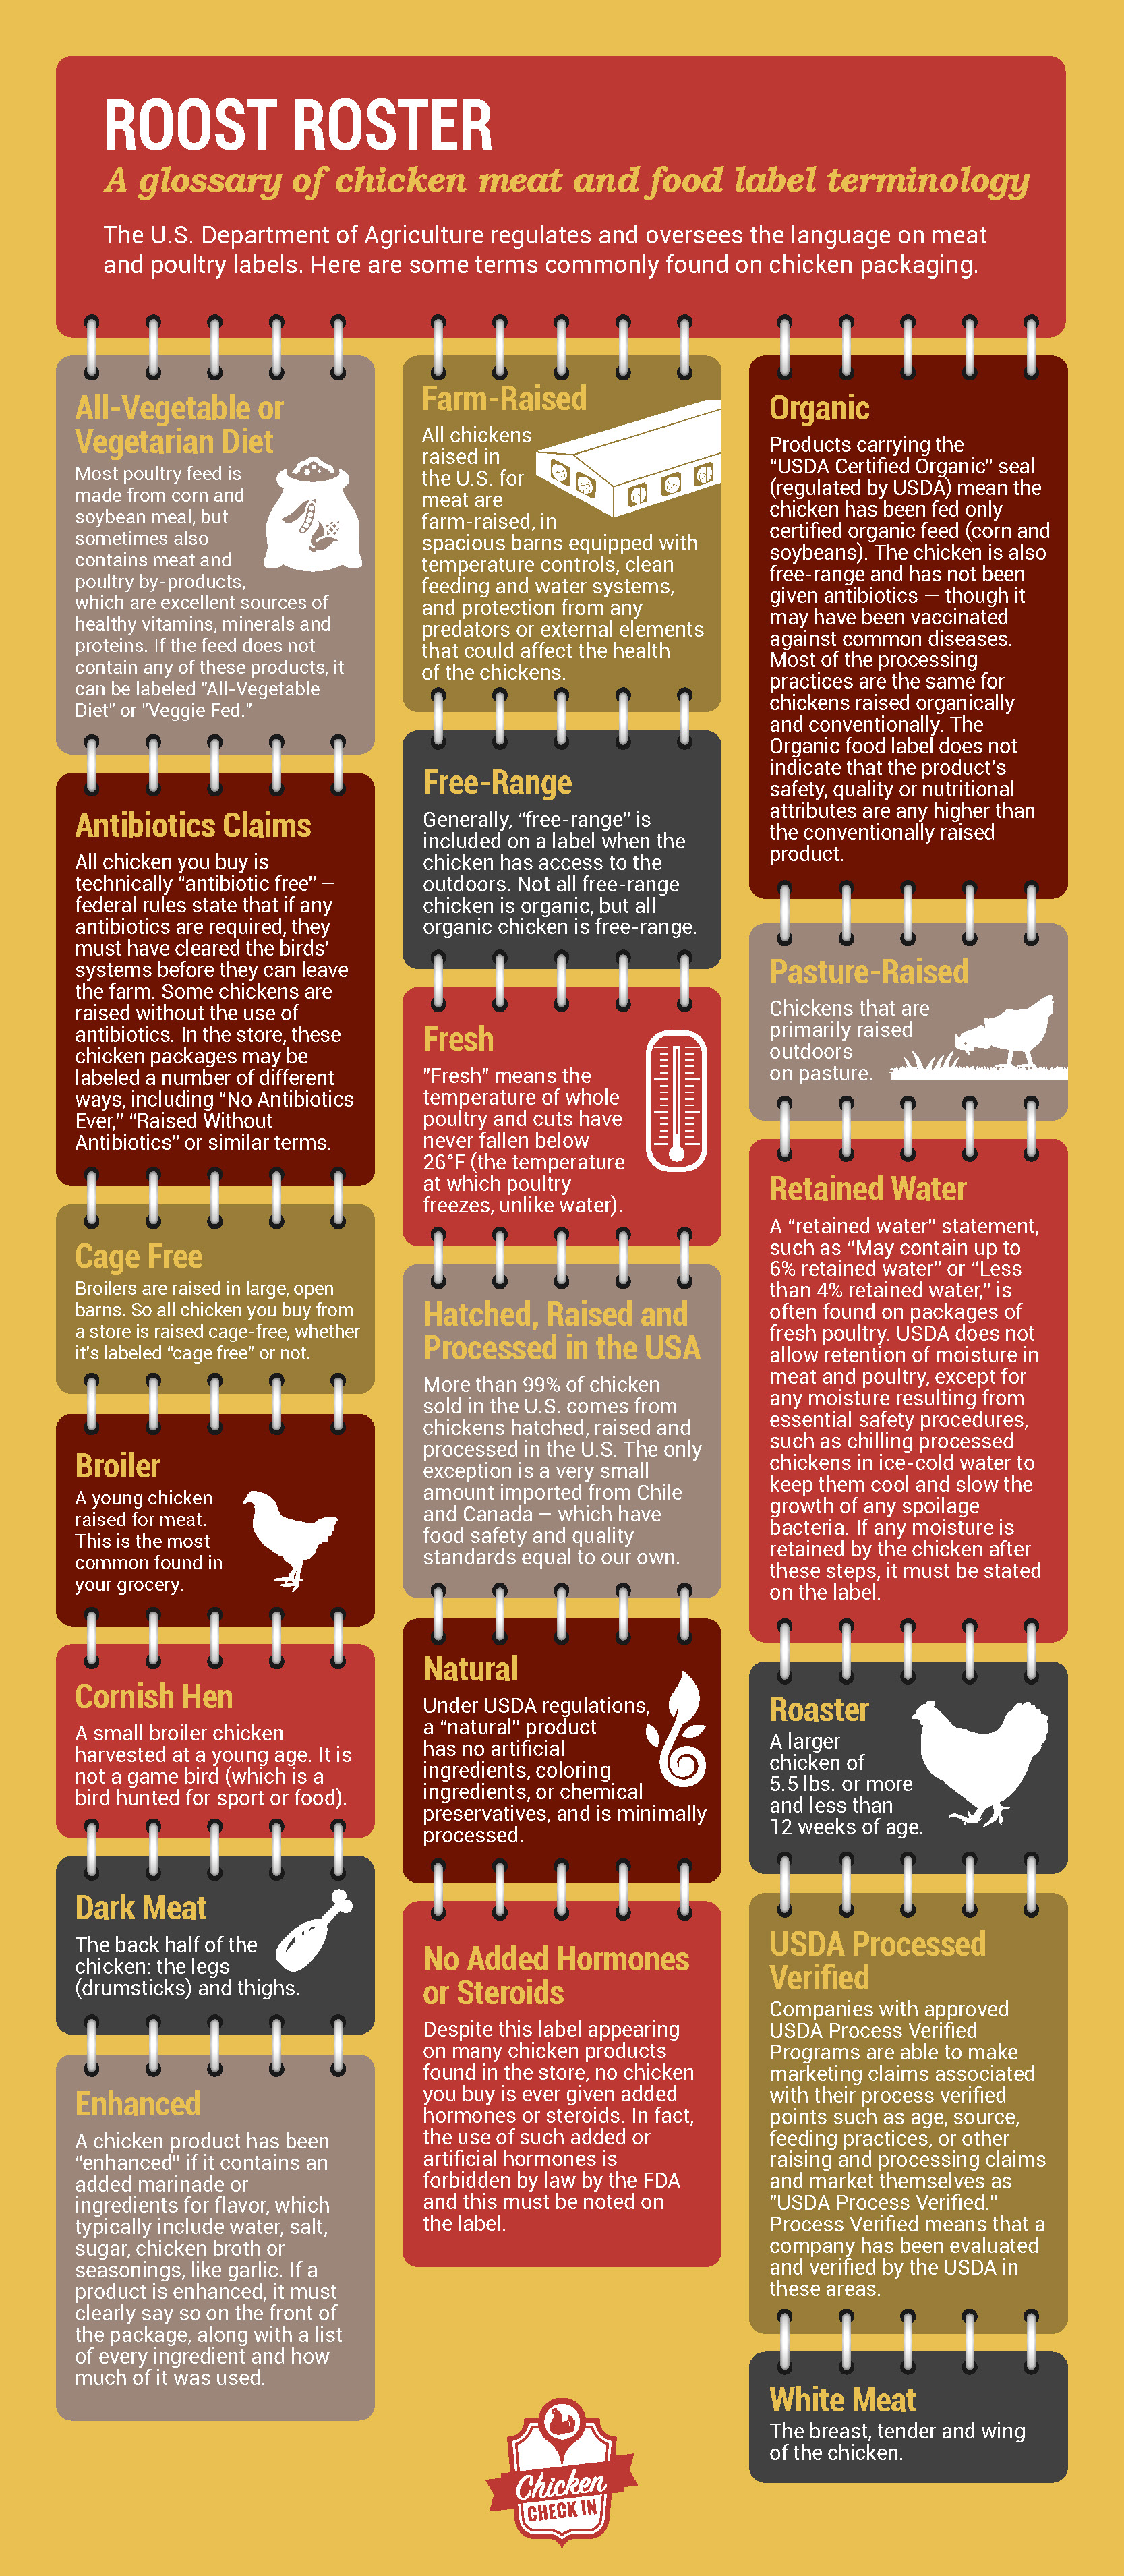 To help make sense of these chicken labeling terms, this infographic explains some of the most common labeling terms on chicken packaging so you can feel more informed the next time you buy chicken for your family.